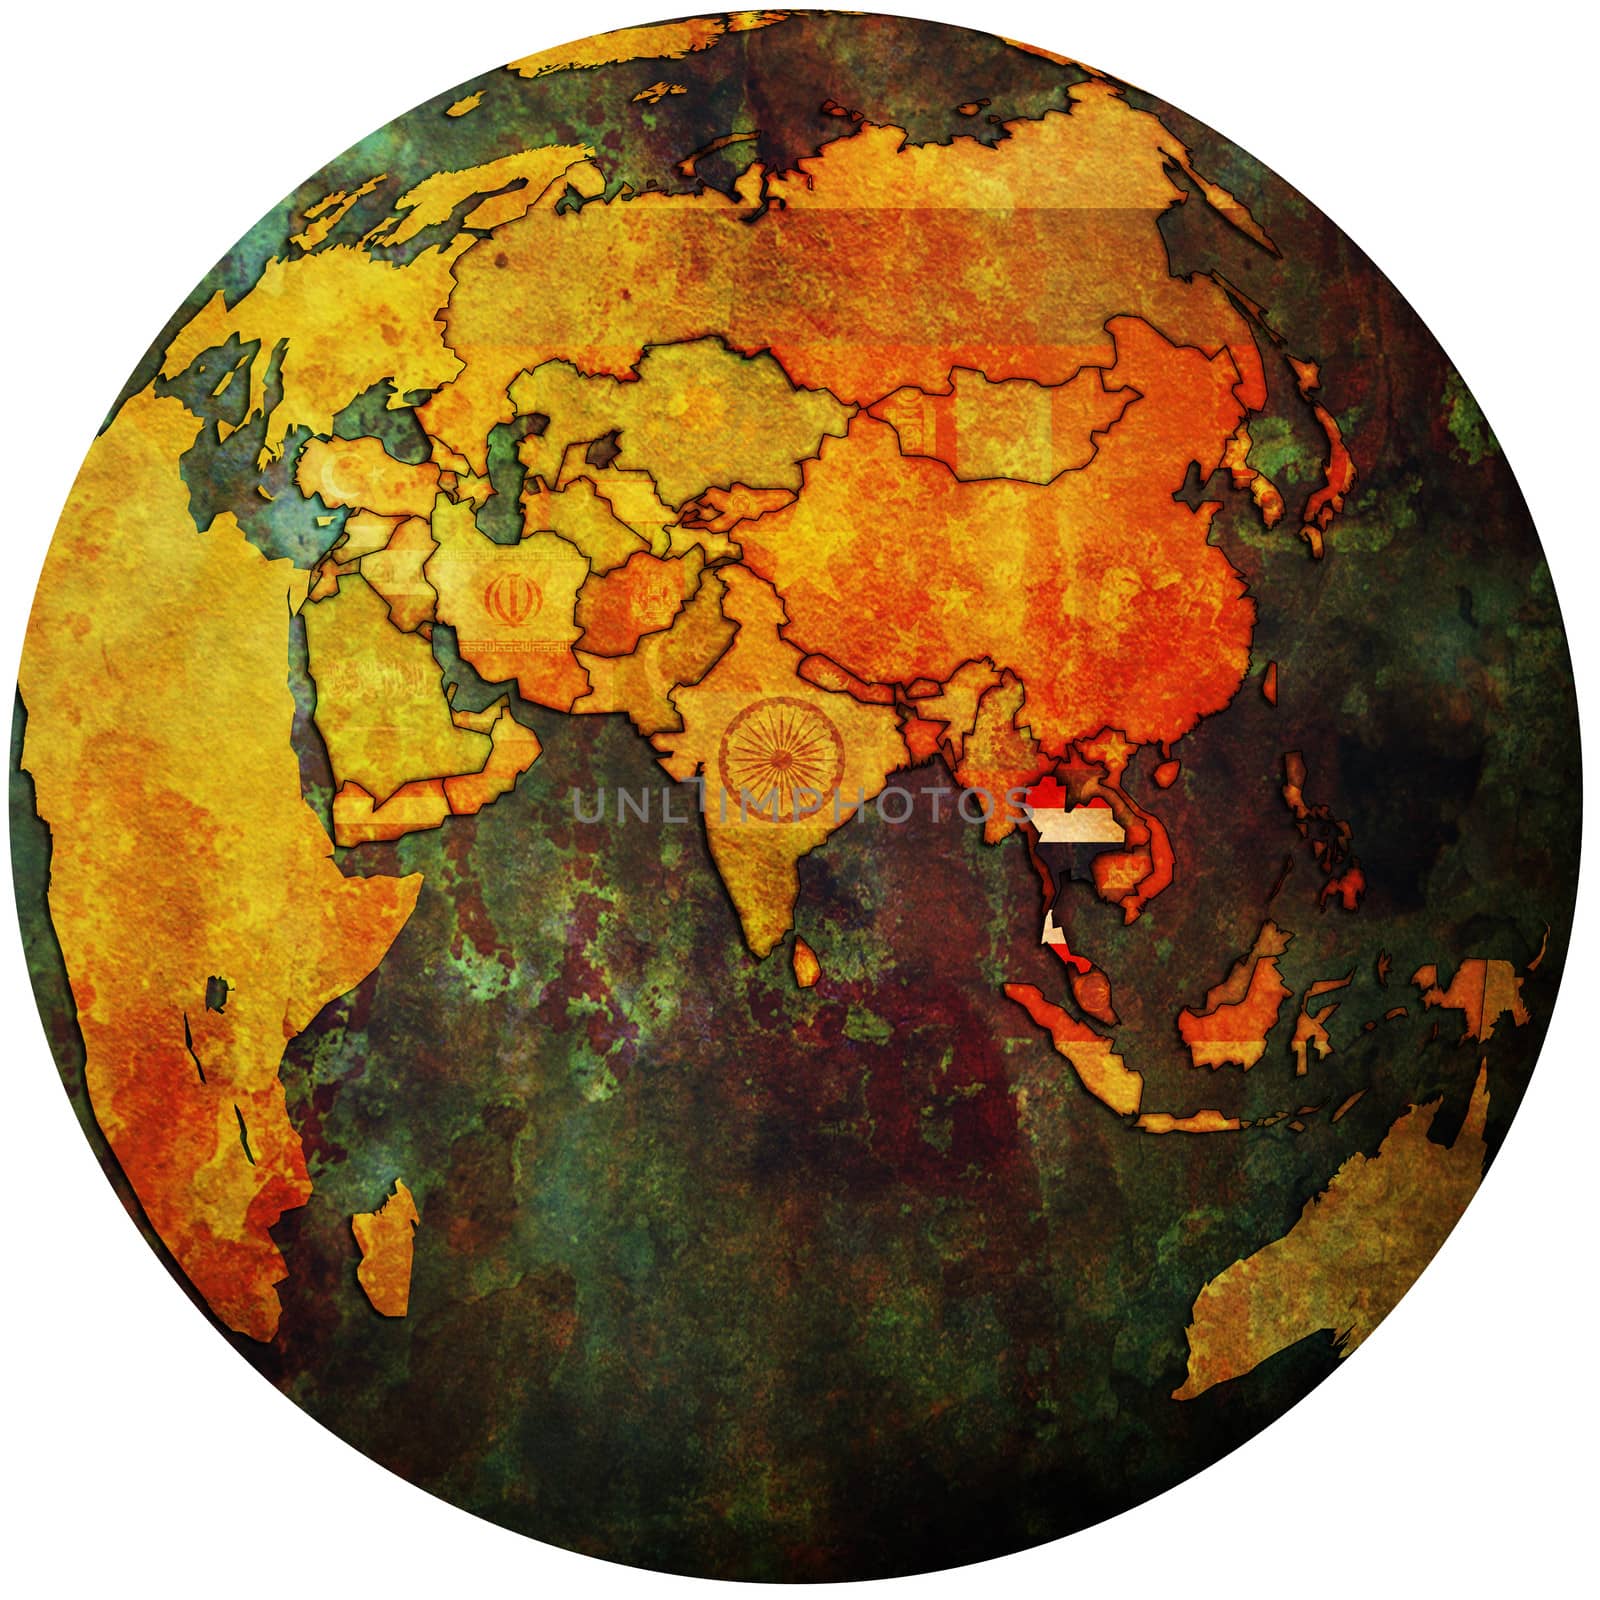 thailand on globe map by michal812